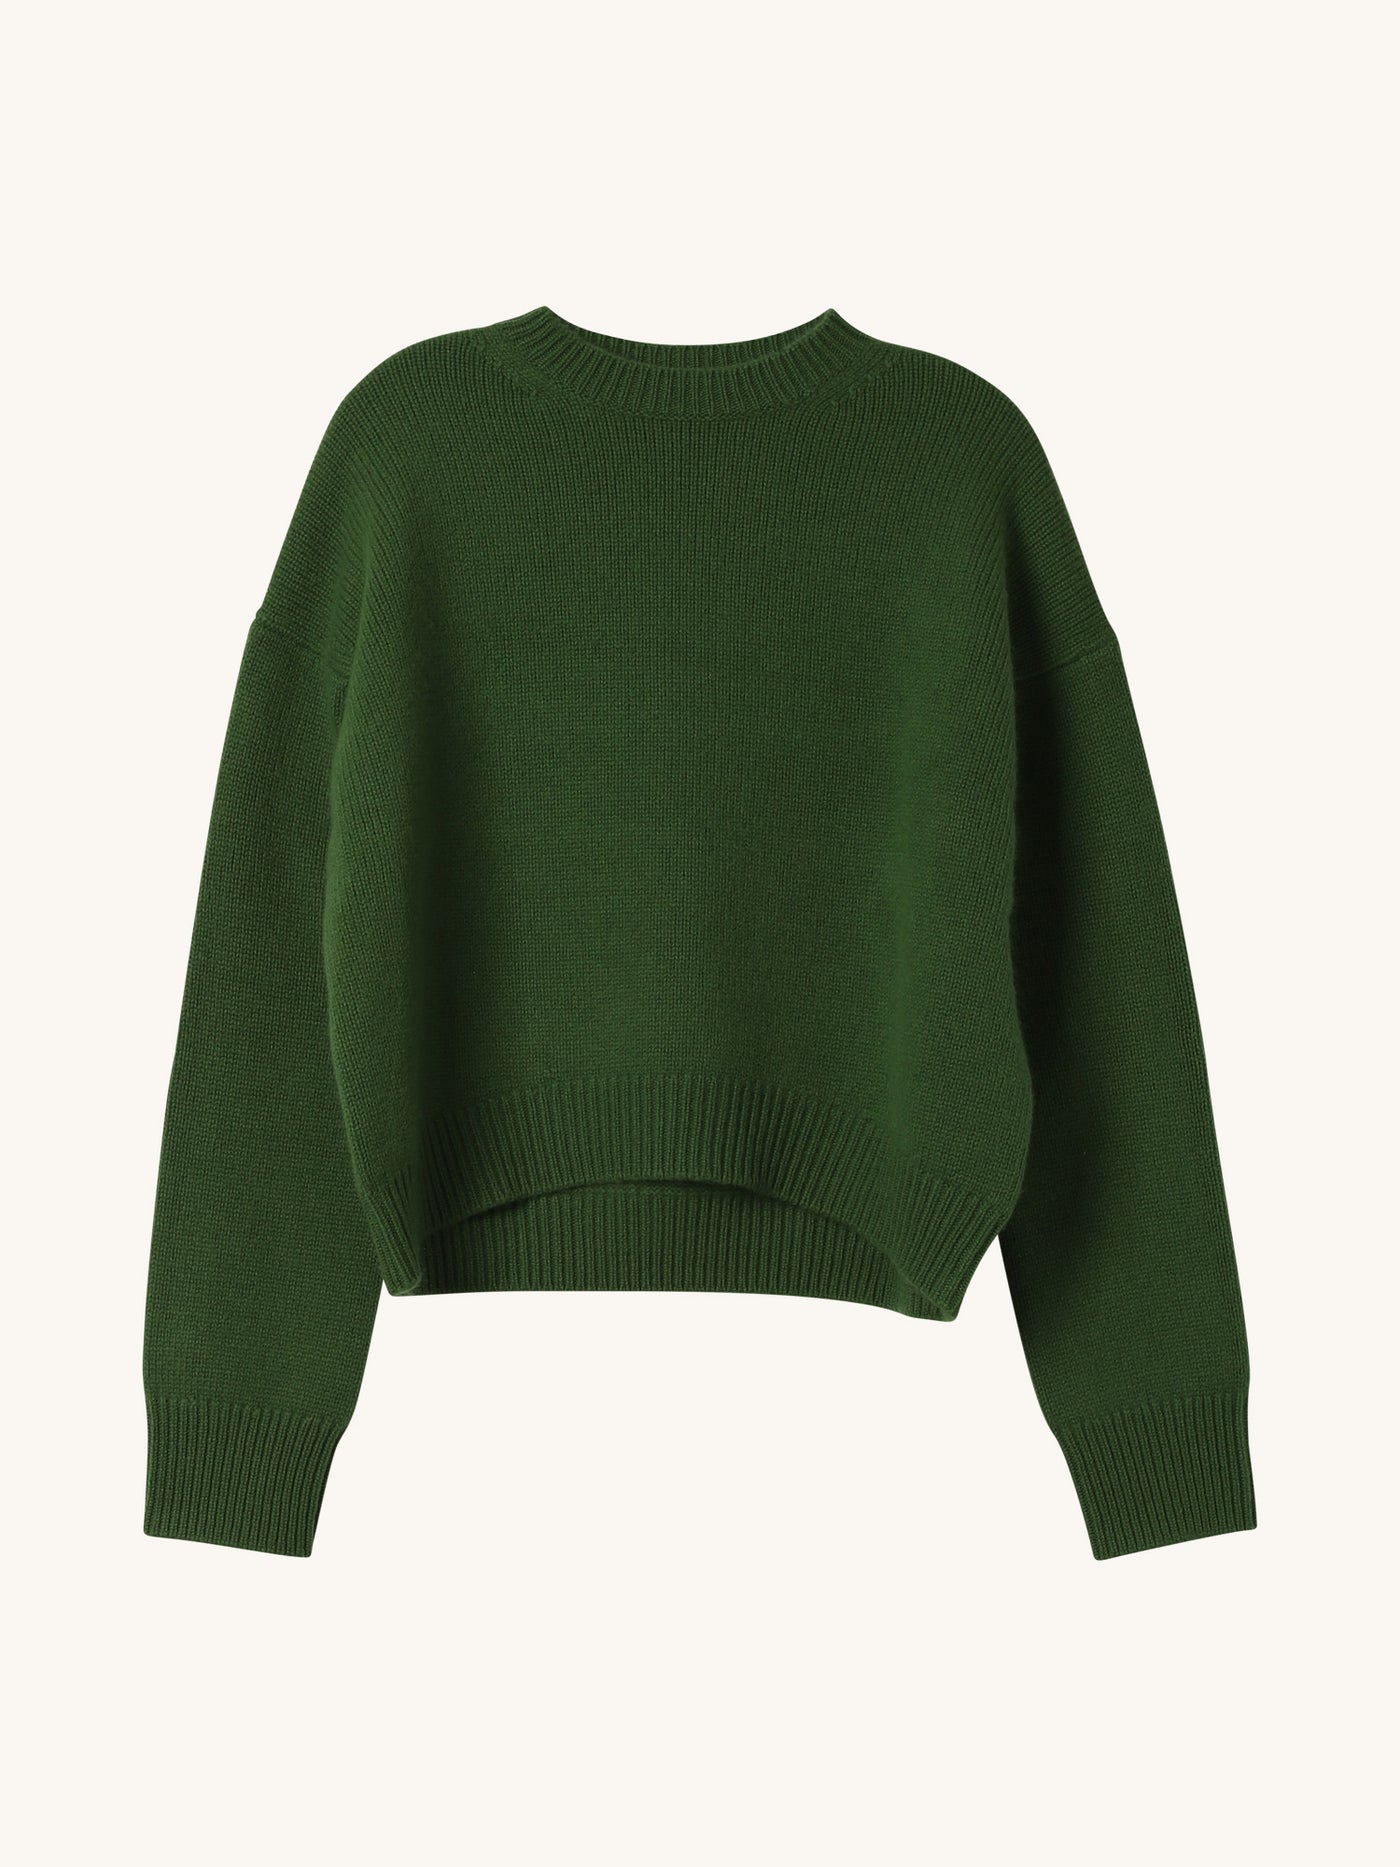 The Ivy Knit